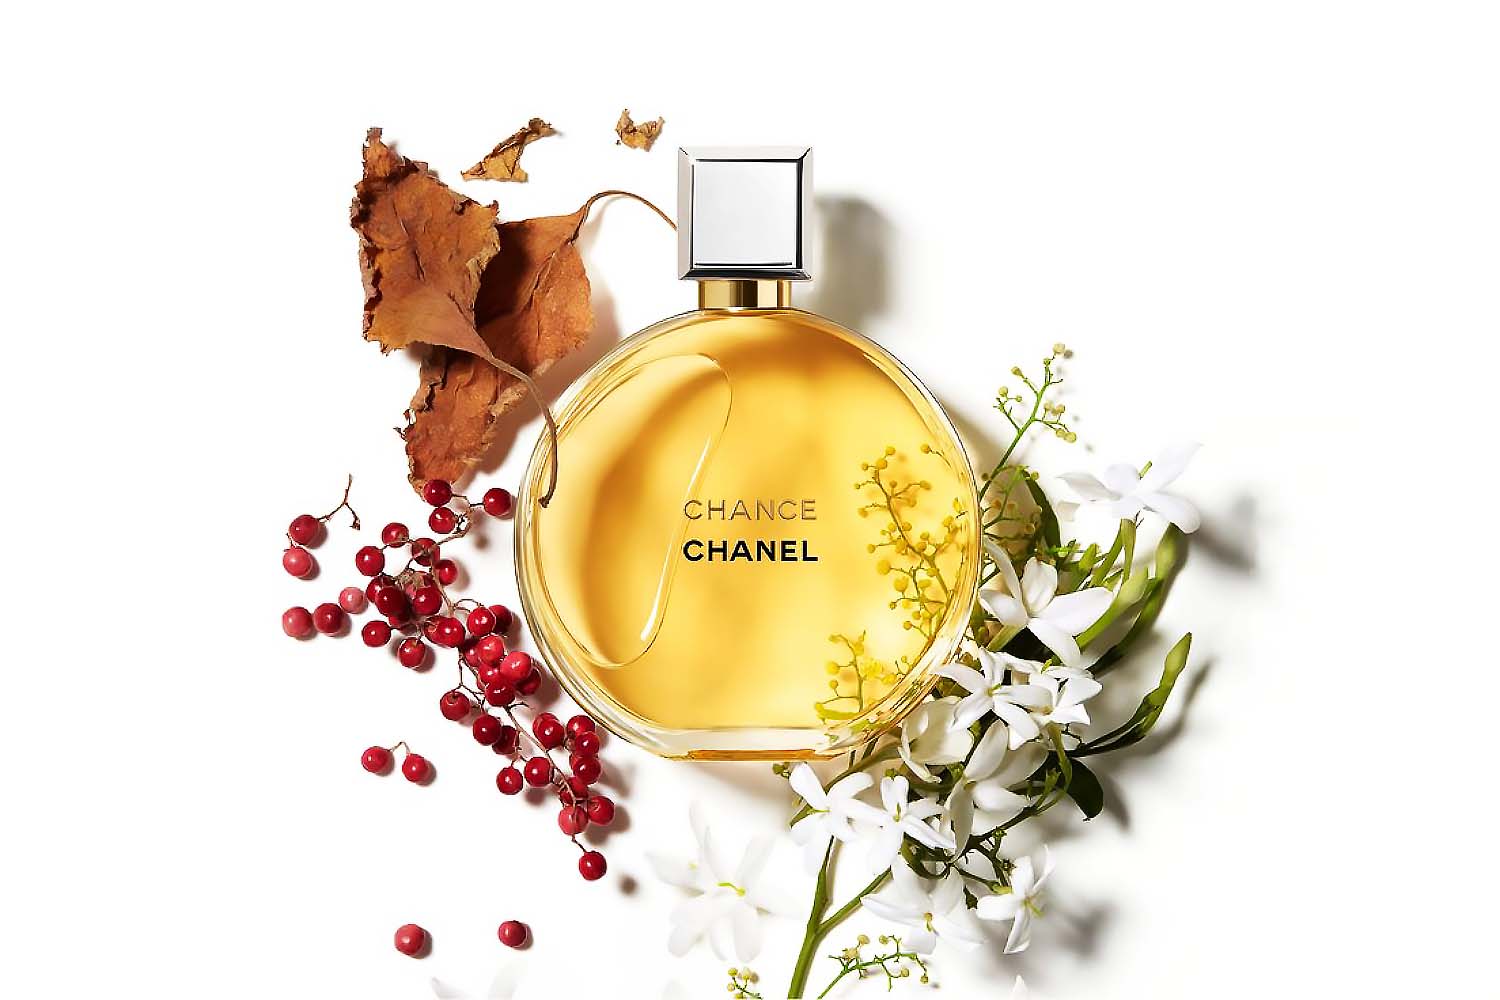 Primark's Cruelty-Free £3.50 Perfume Smells Just Like Chanel Chance